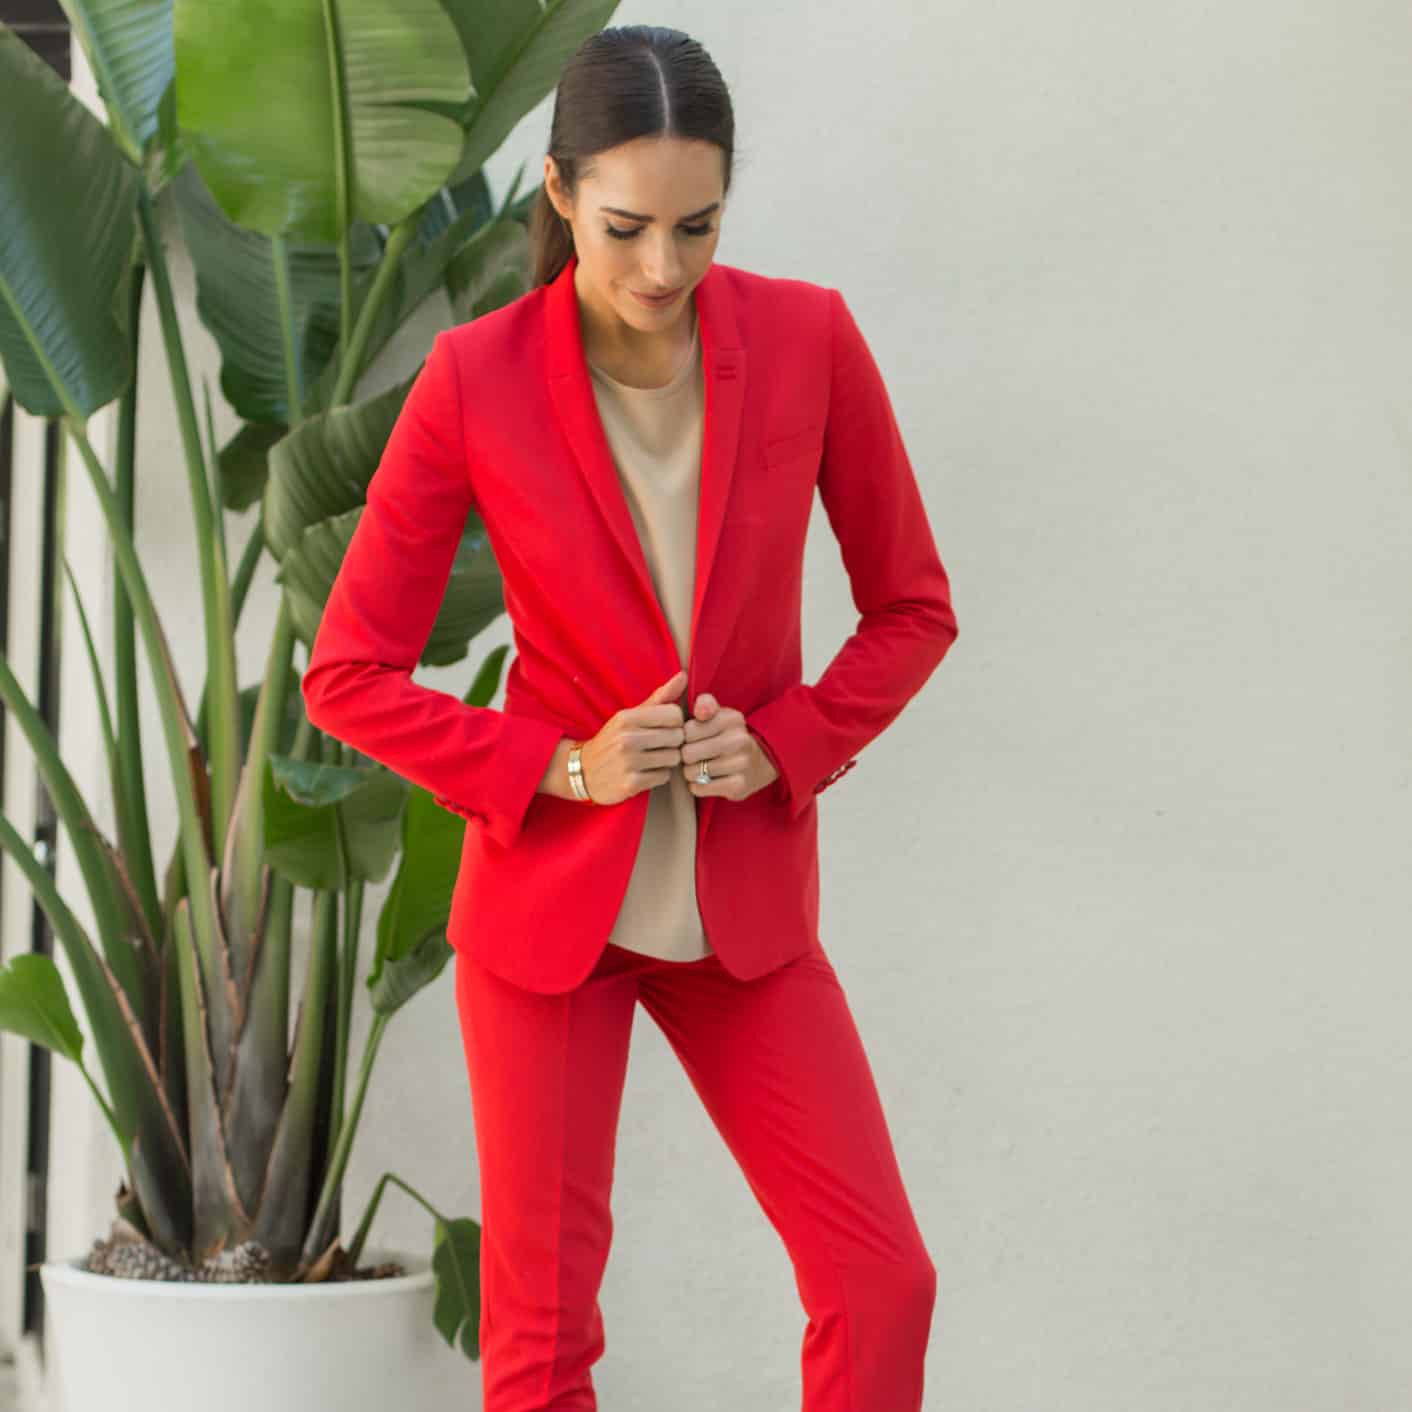 Louise Roe wearing a red power suit